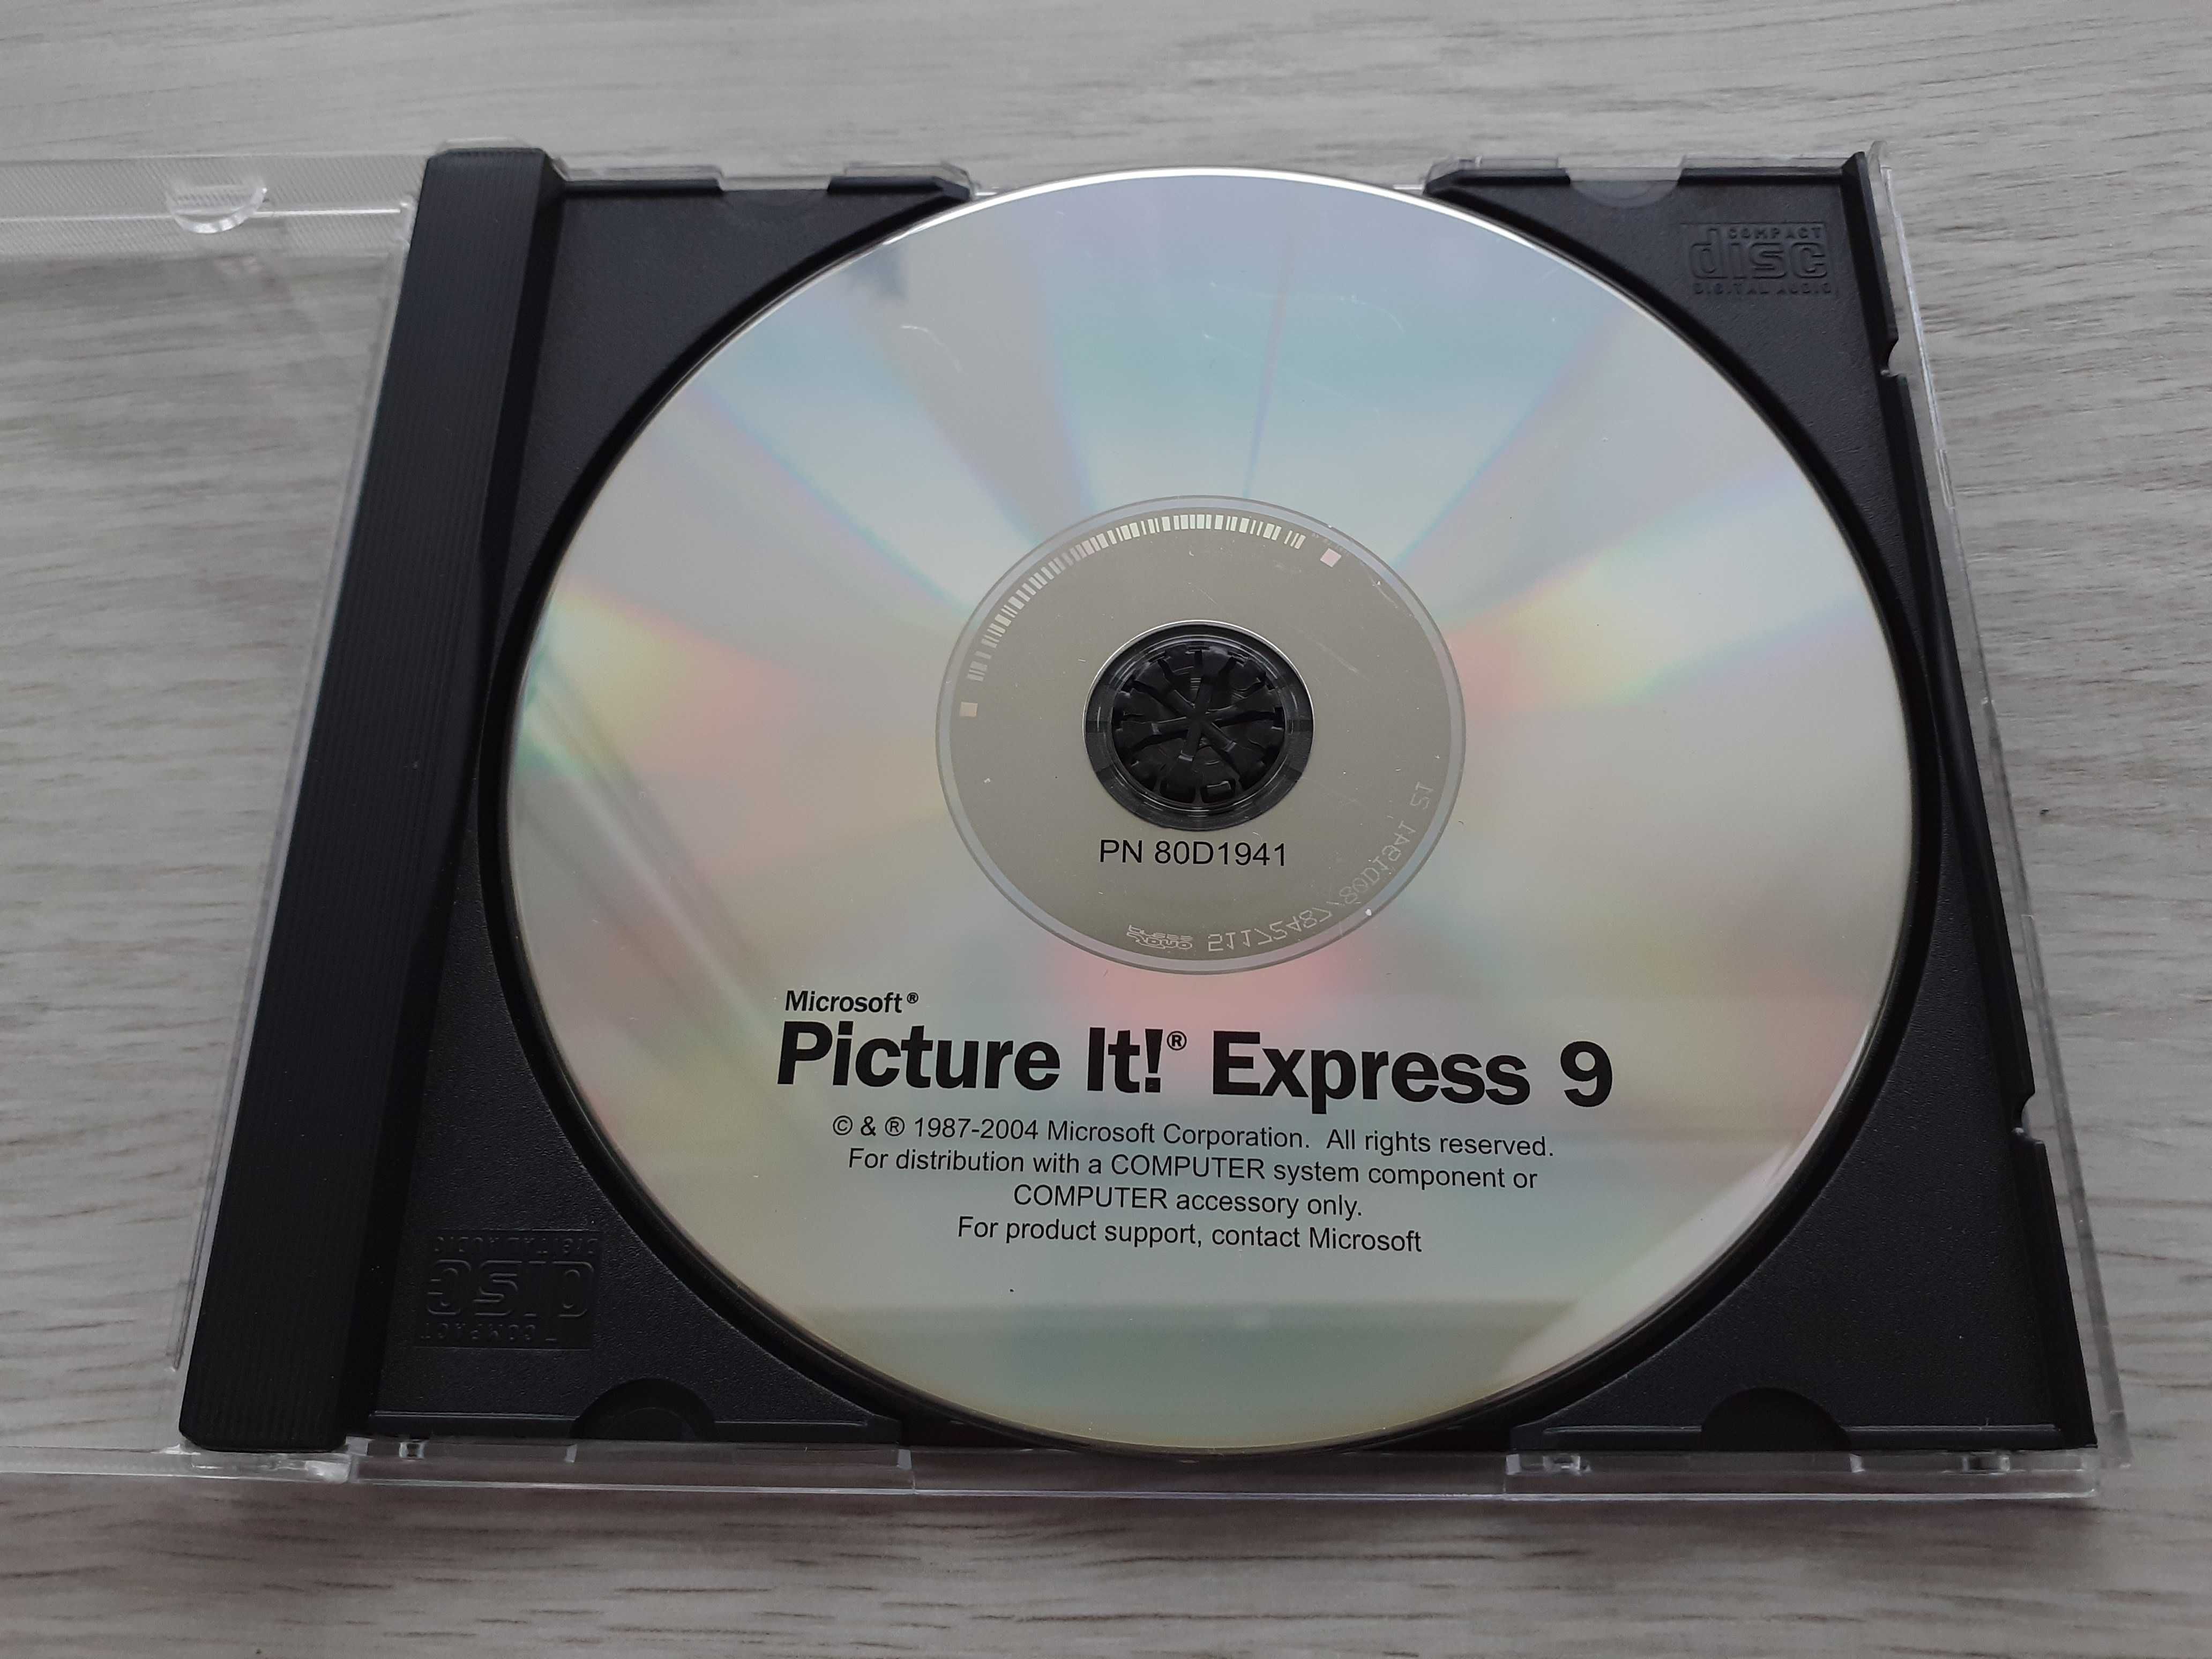 Microsoft Picture It! Express 9